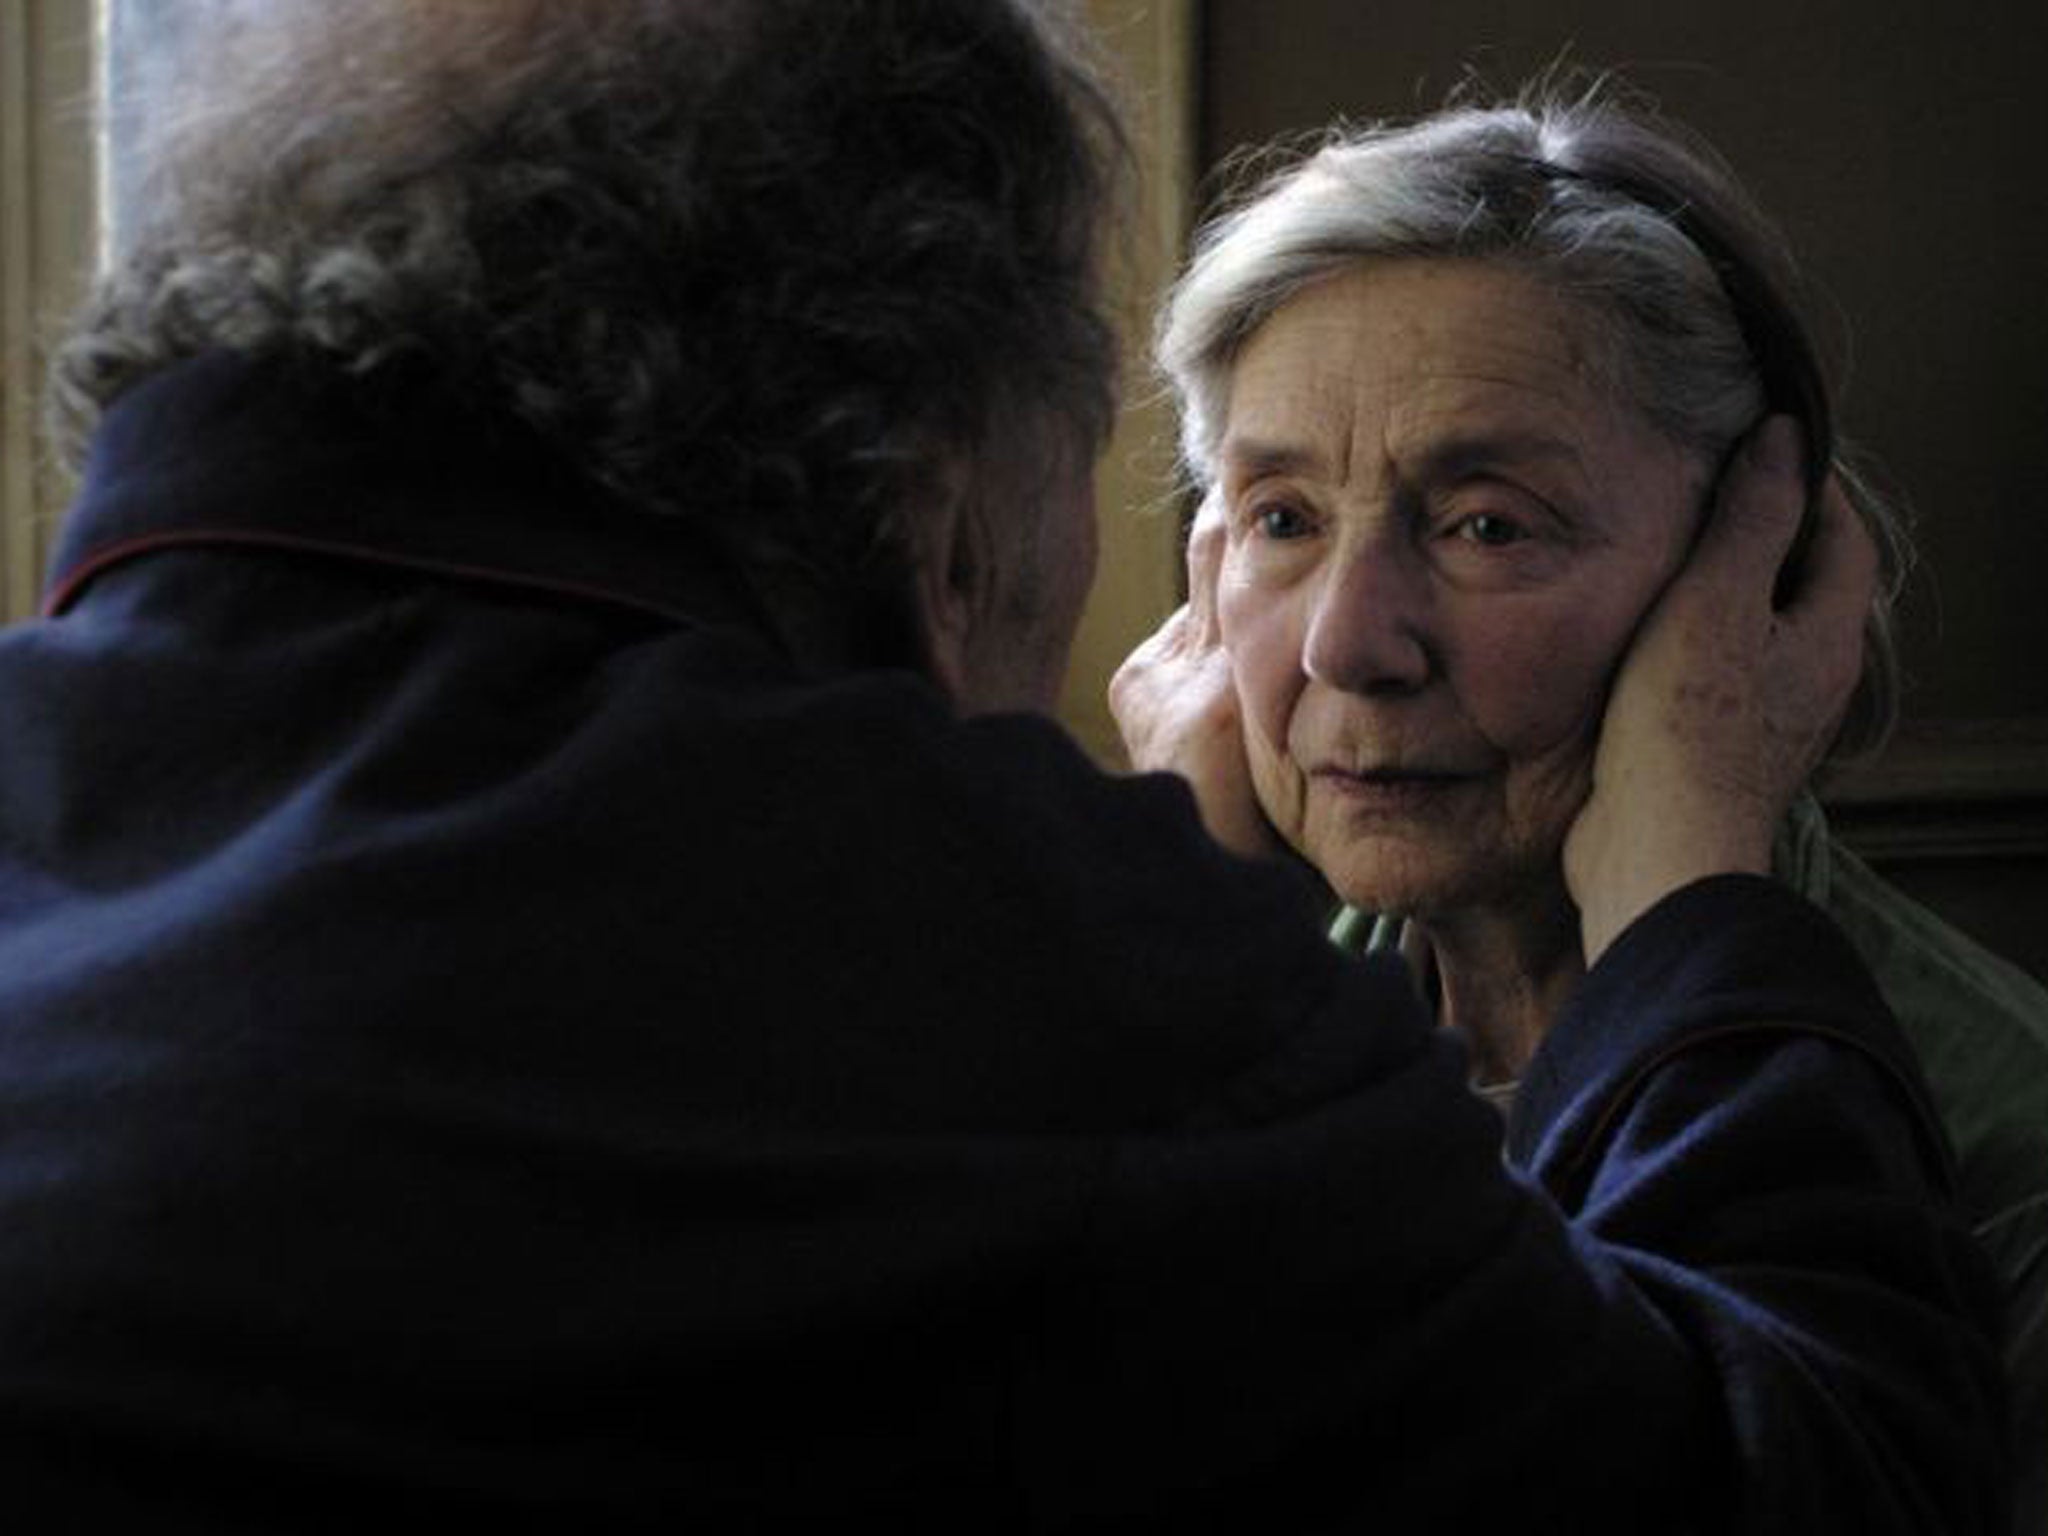 Michael Haneke's Amour: An uncompromising masterpiece, with two immense central performances